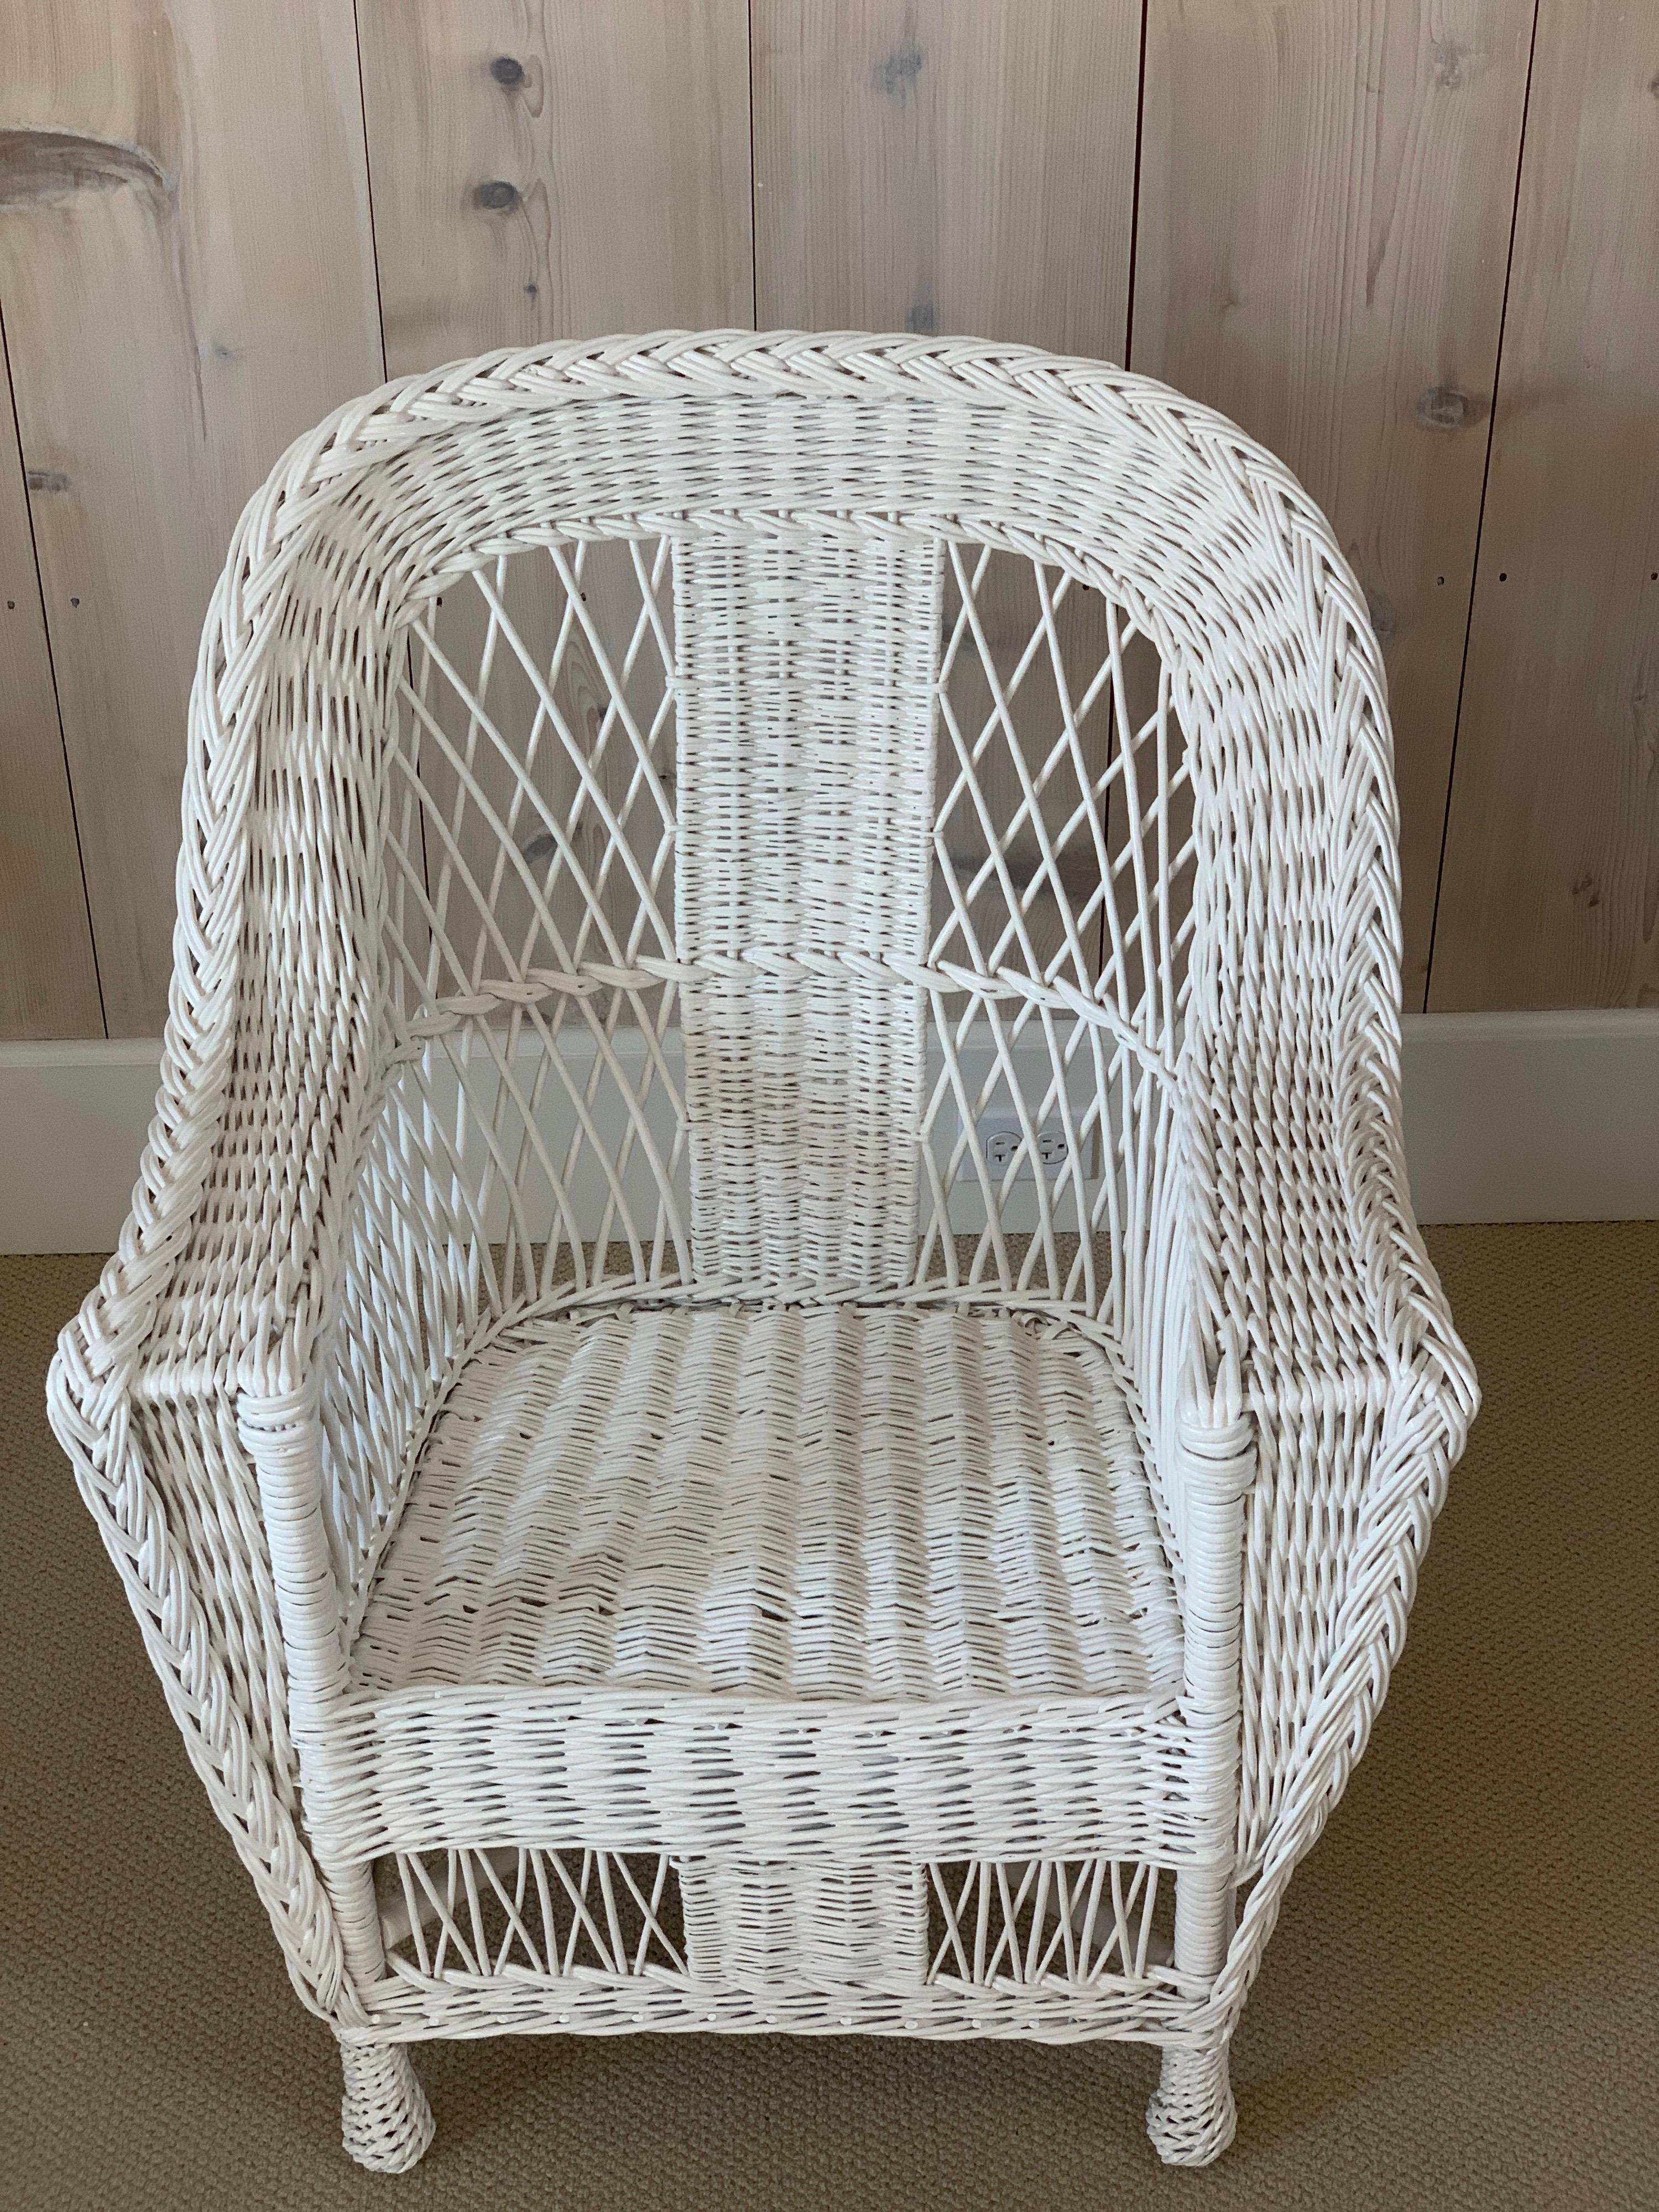 Antique willow wicker chair in fresh white paint. Handwoven of willow this chair measures: 28' wide, 26